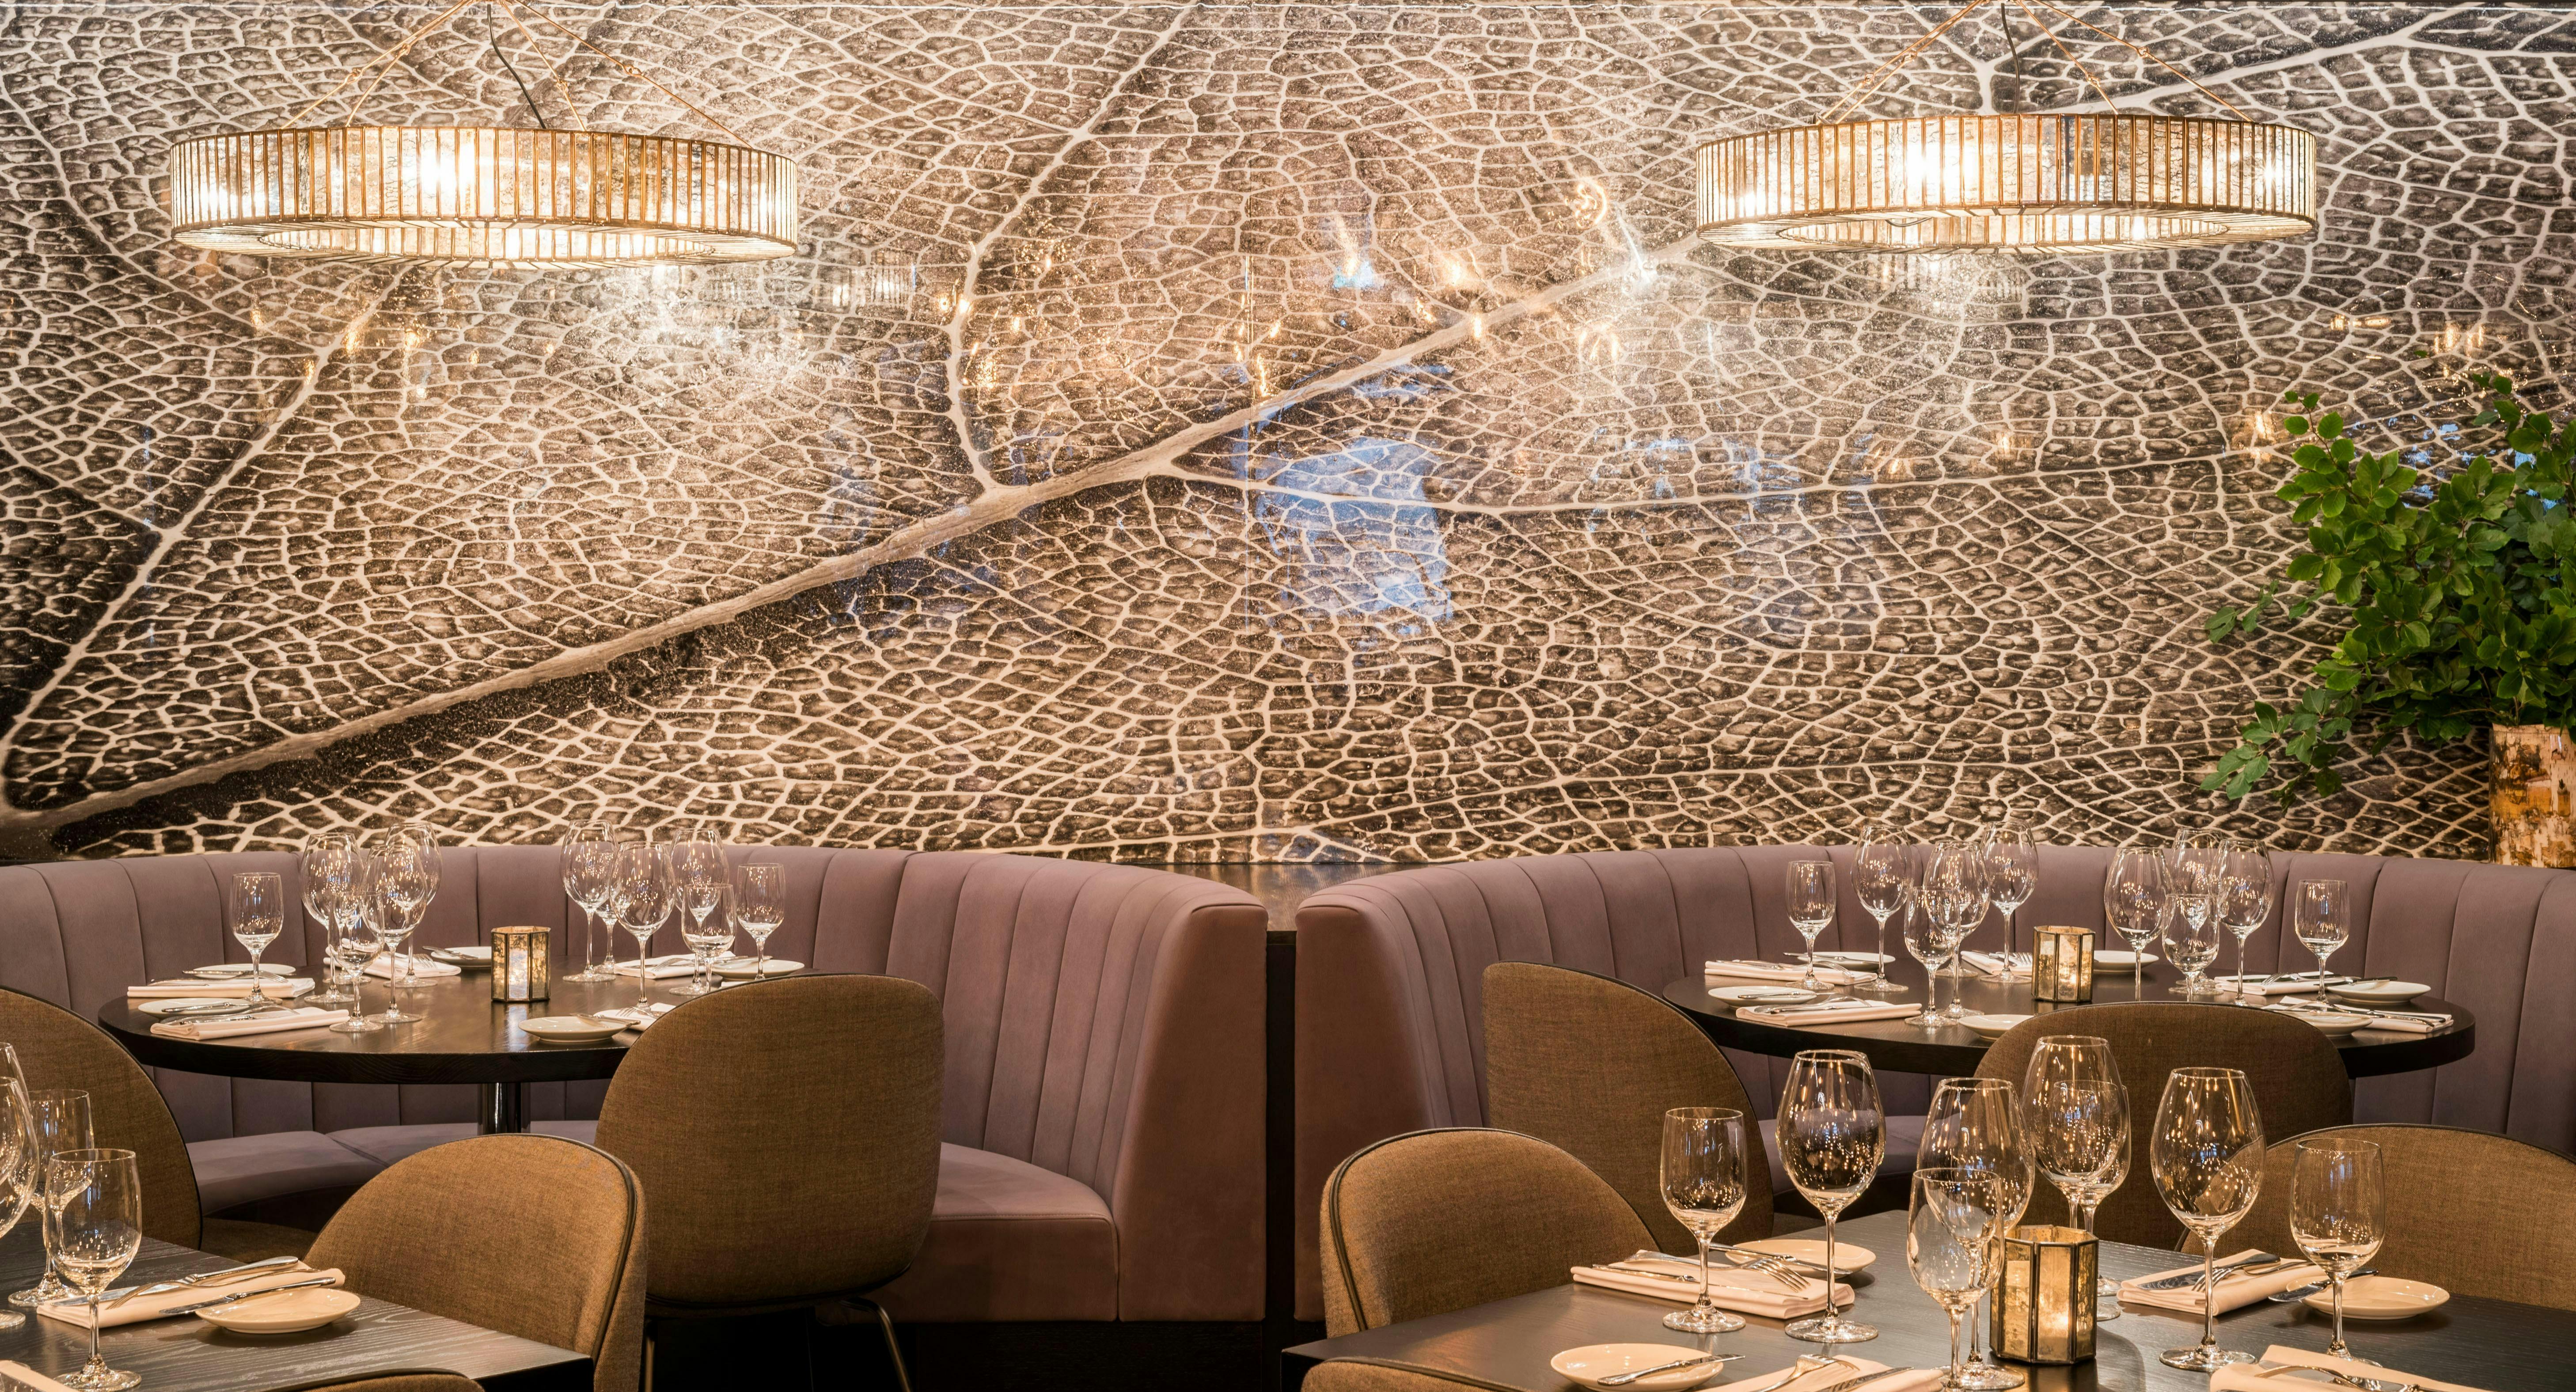 Photo of restaurant Gaucho - Piccadilly in Mayfair, London